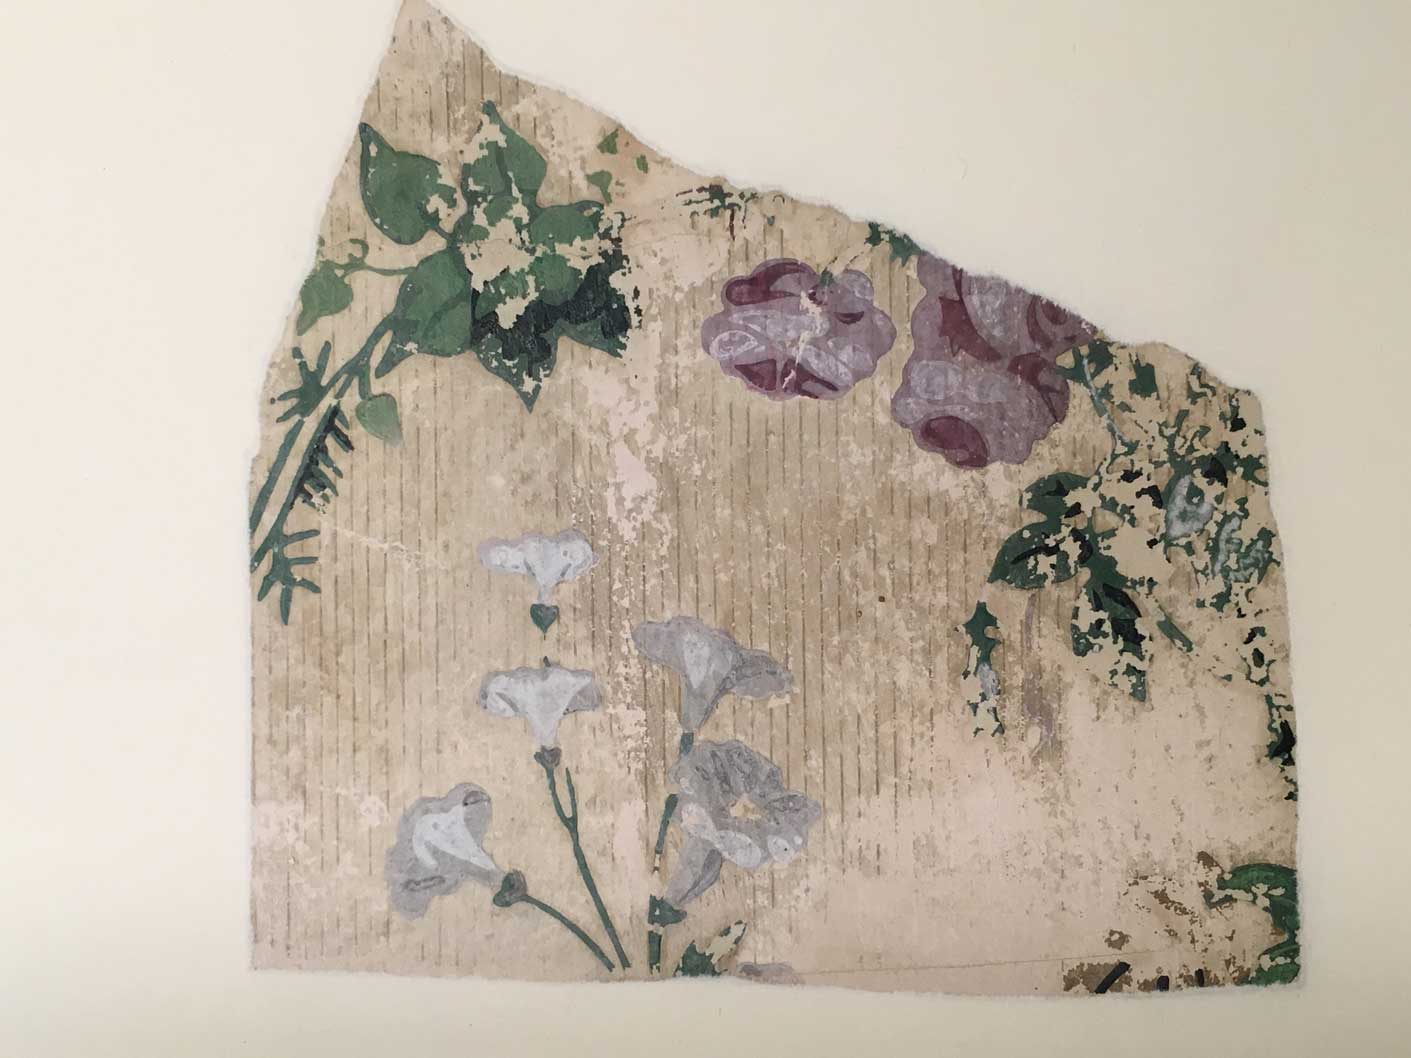 A detail of a historical wallpaper with a floral pattern of white and mauve flowers. The green pigment contains arsenic.